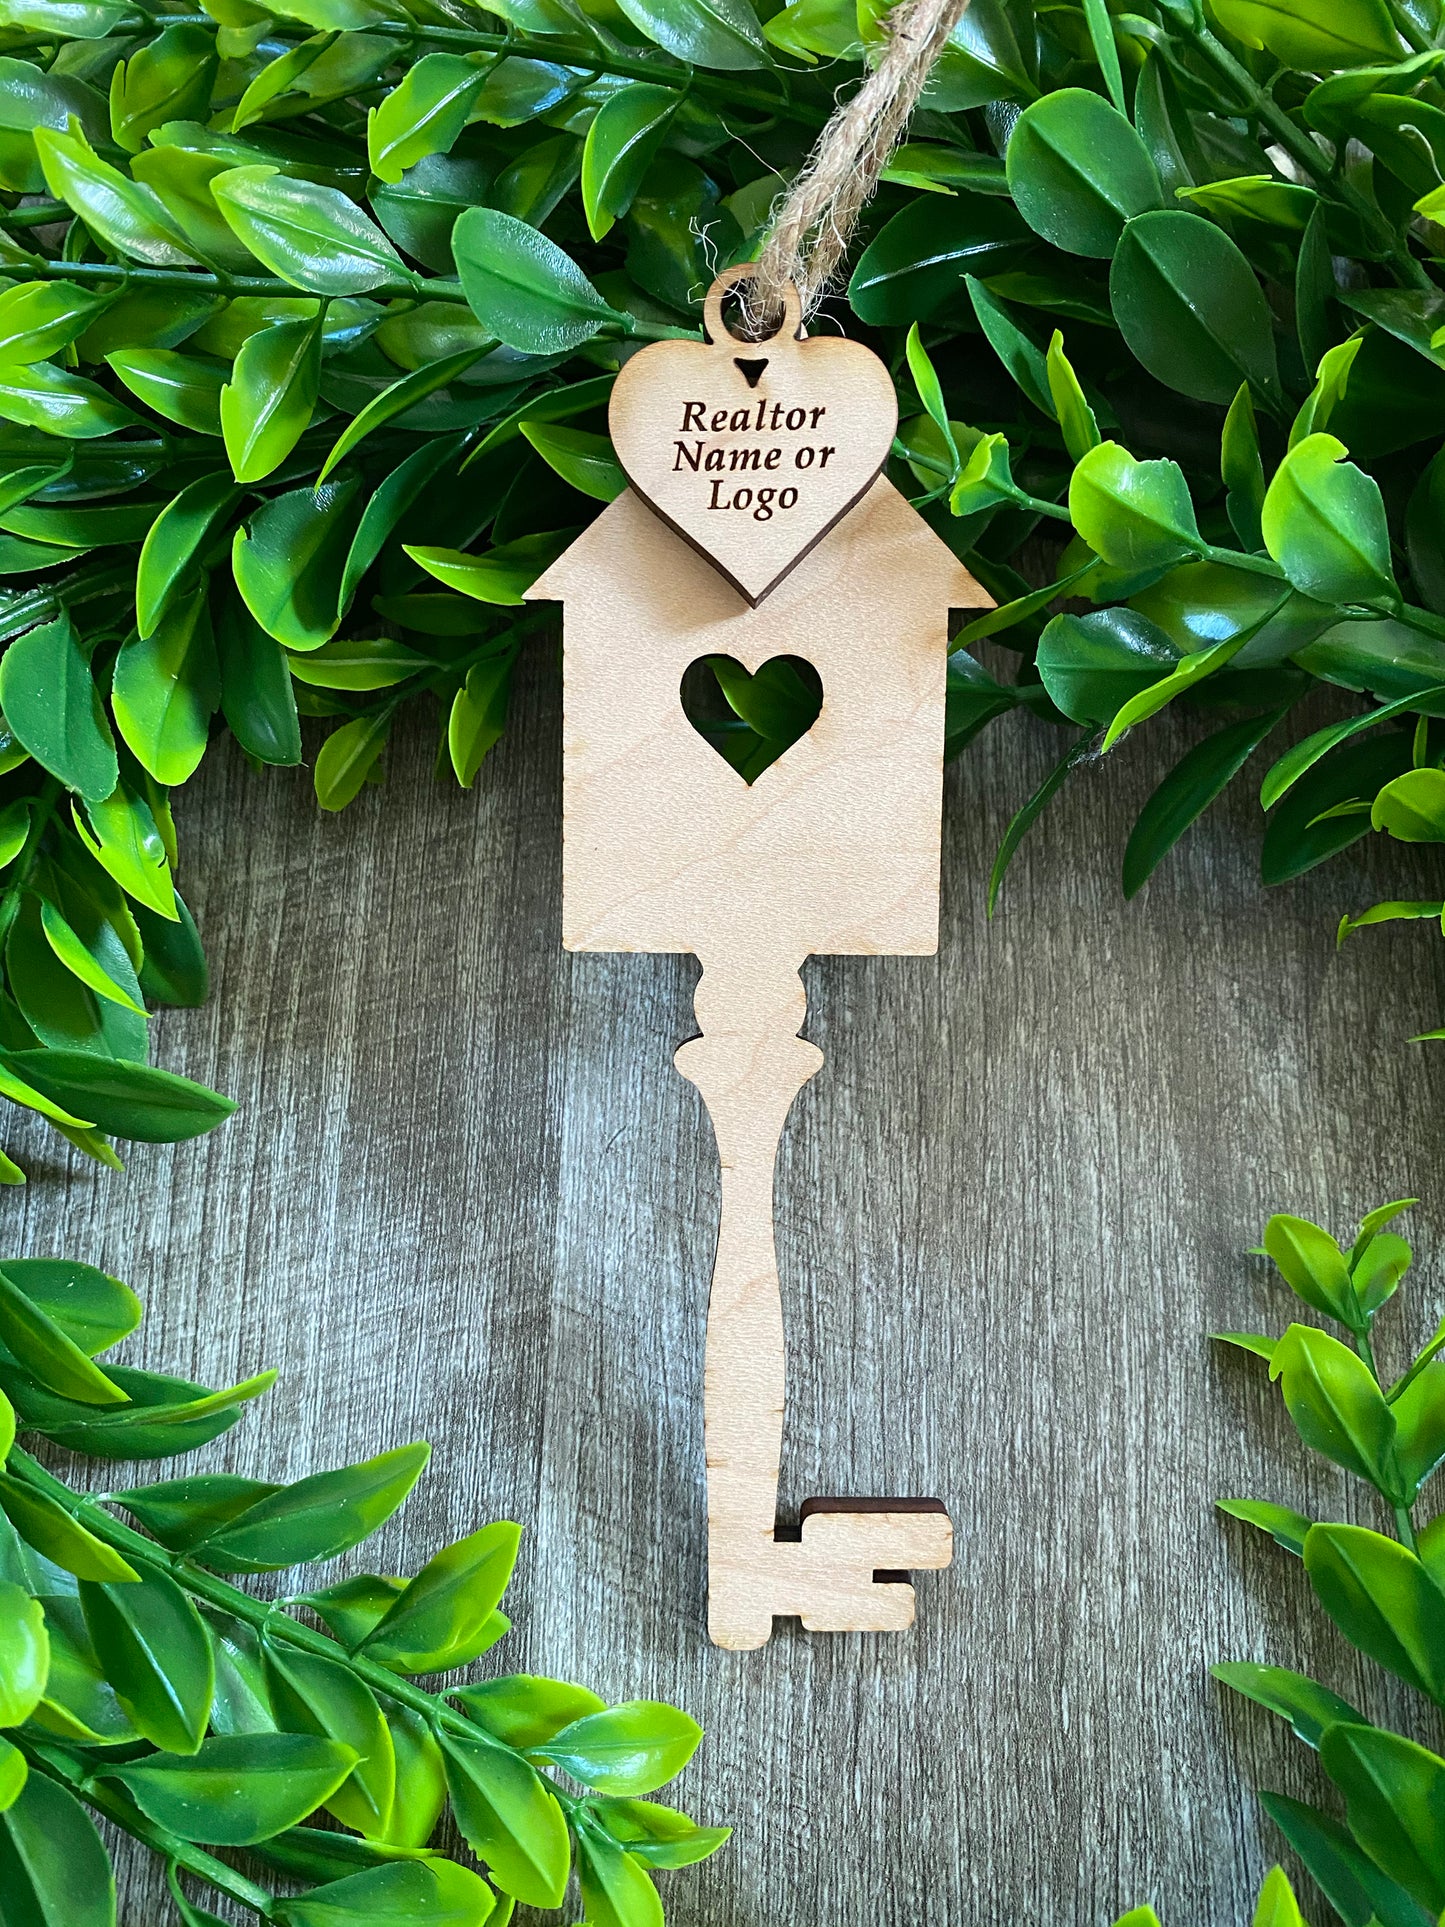 New home, personalized ornament home key for housewarming, new homeowners, holidays, Christmas, realtor gift, custom laser engraved wood